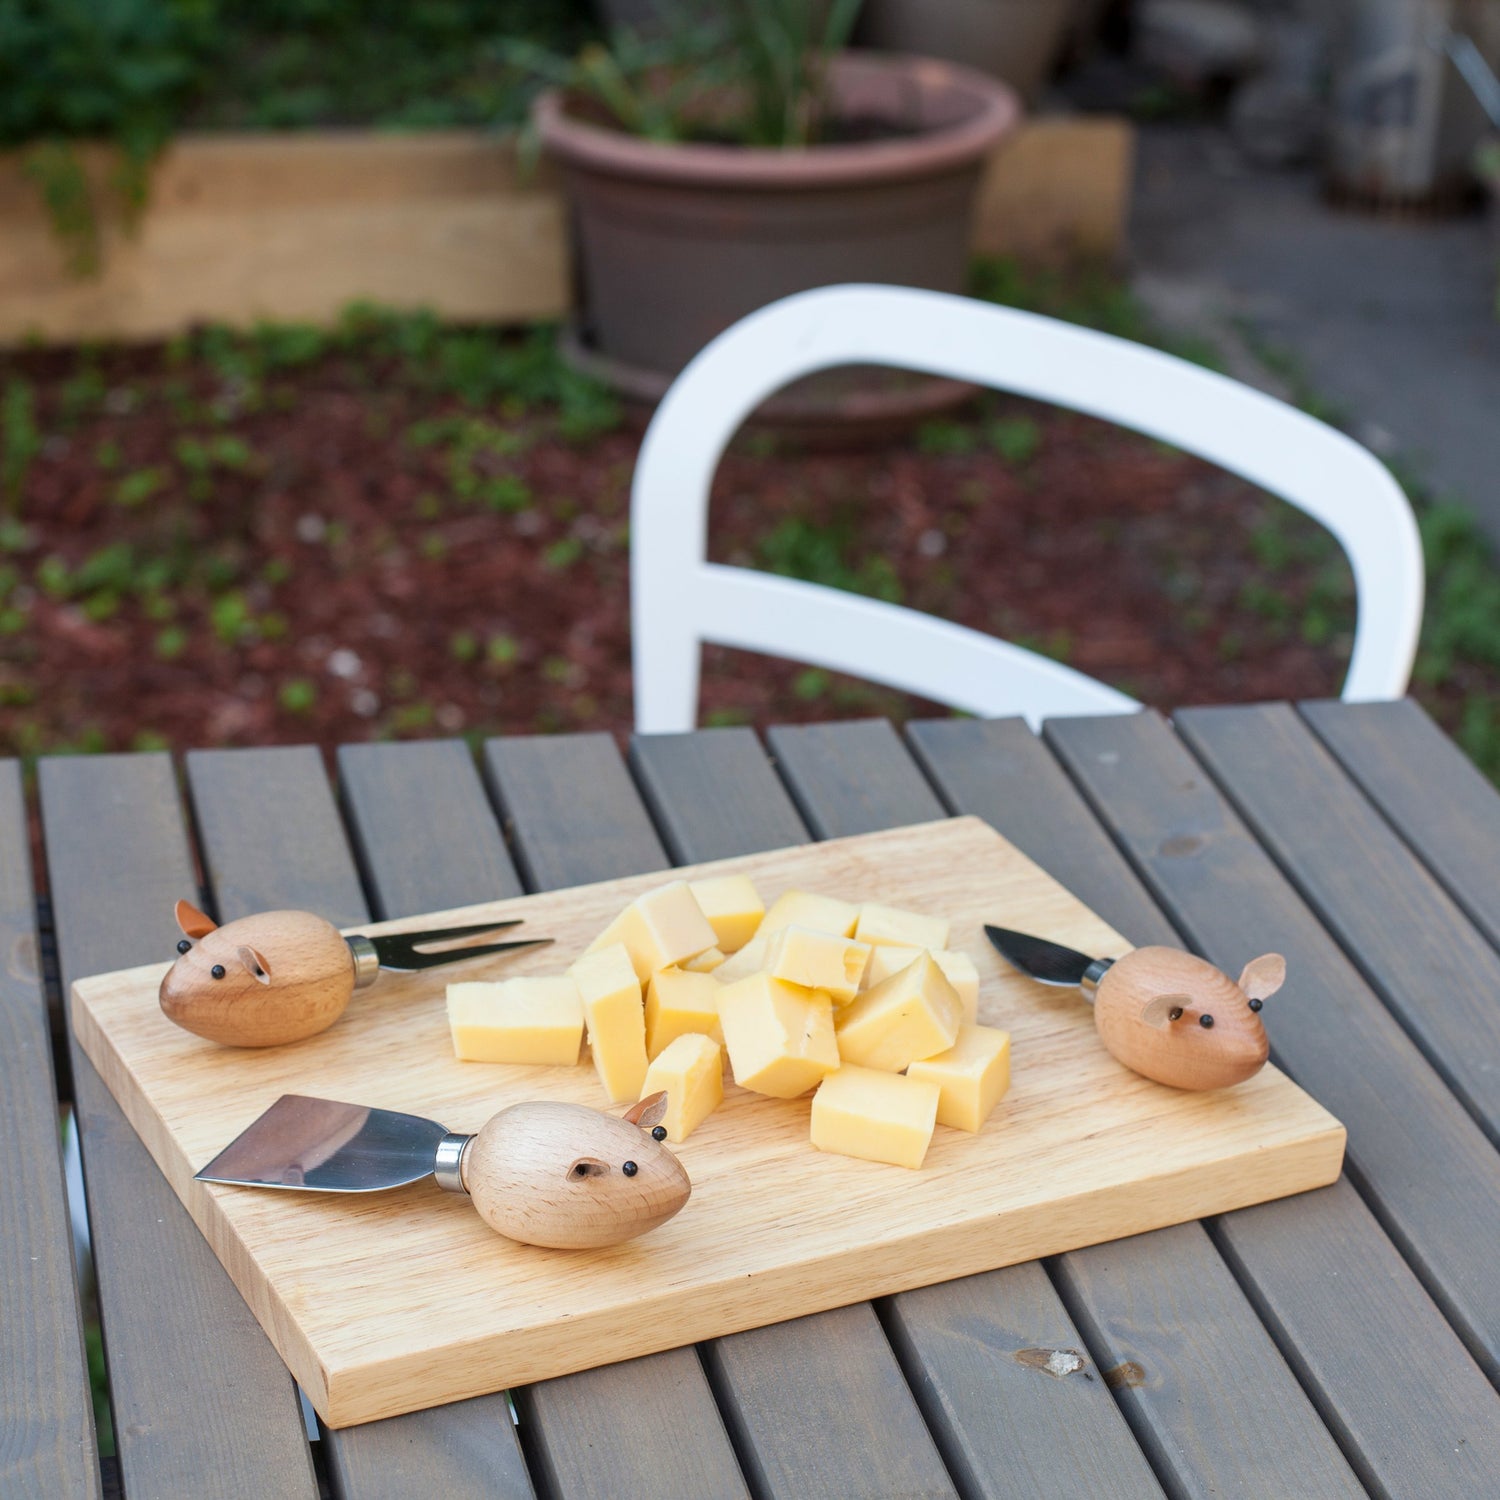 Cheese Board And 3 Mouse Knives